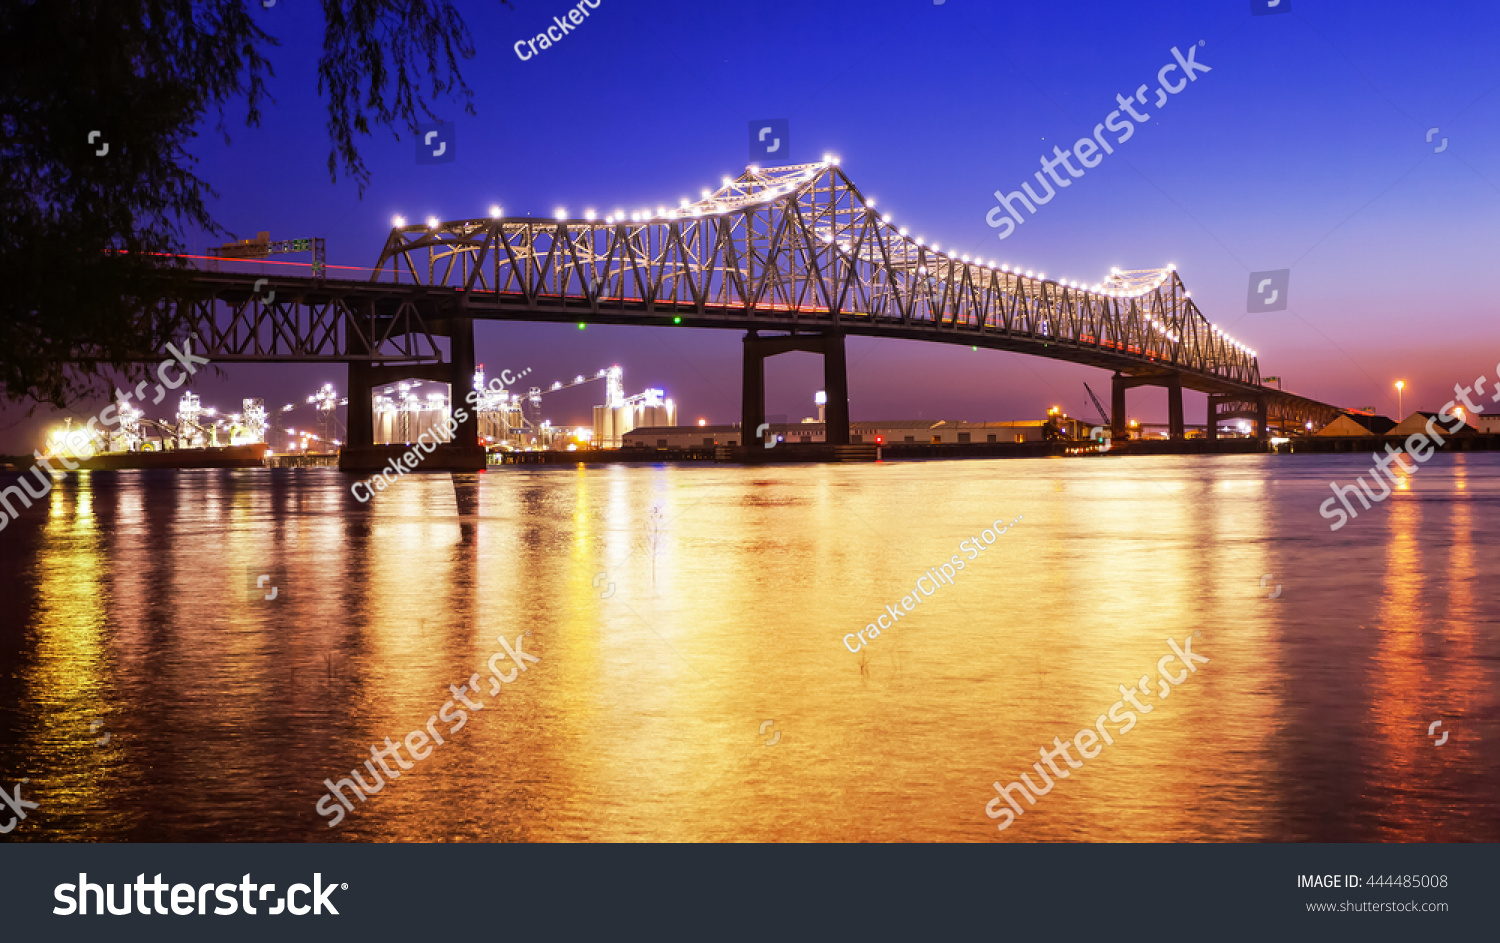 Horace Wilkinson Bridge crosses over the Mississippi River at night in Baton Rouge, Louisiana #444485008